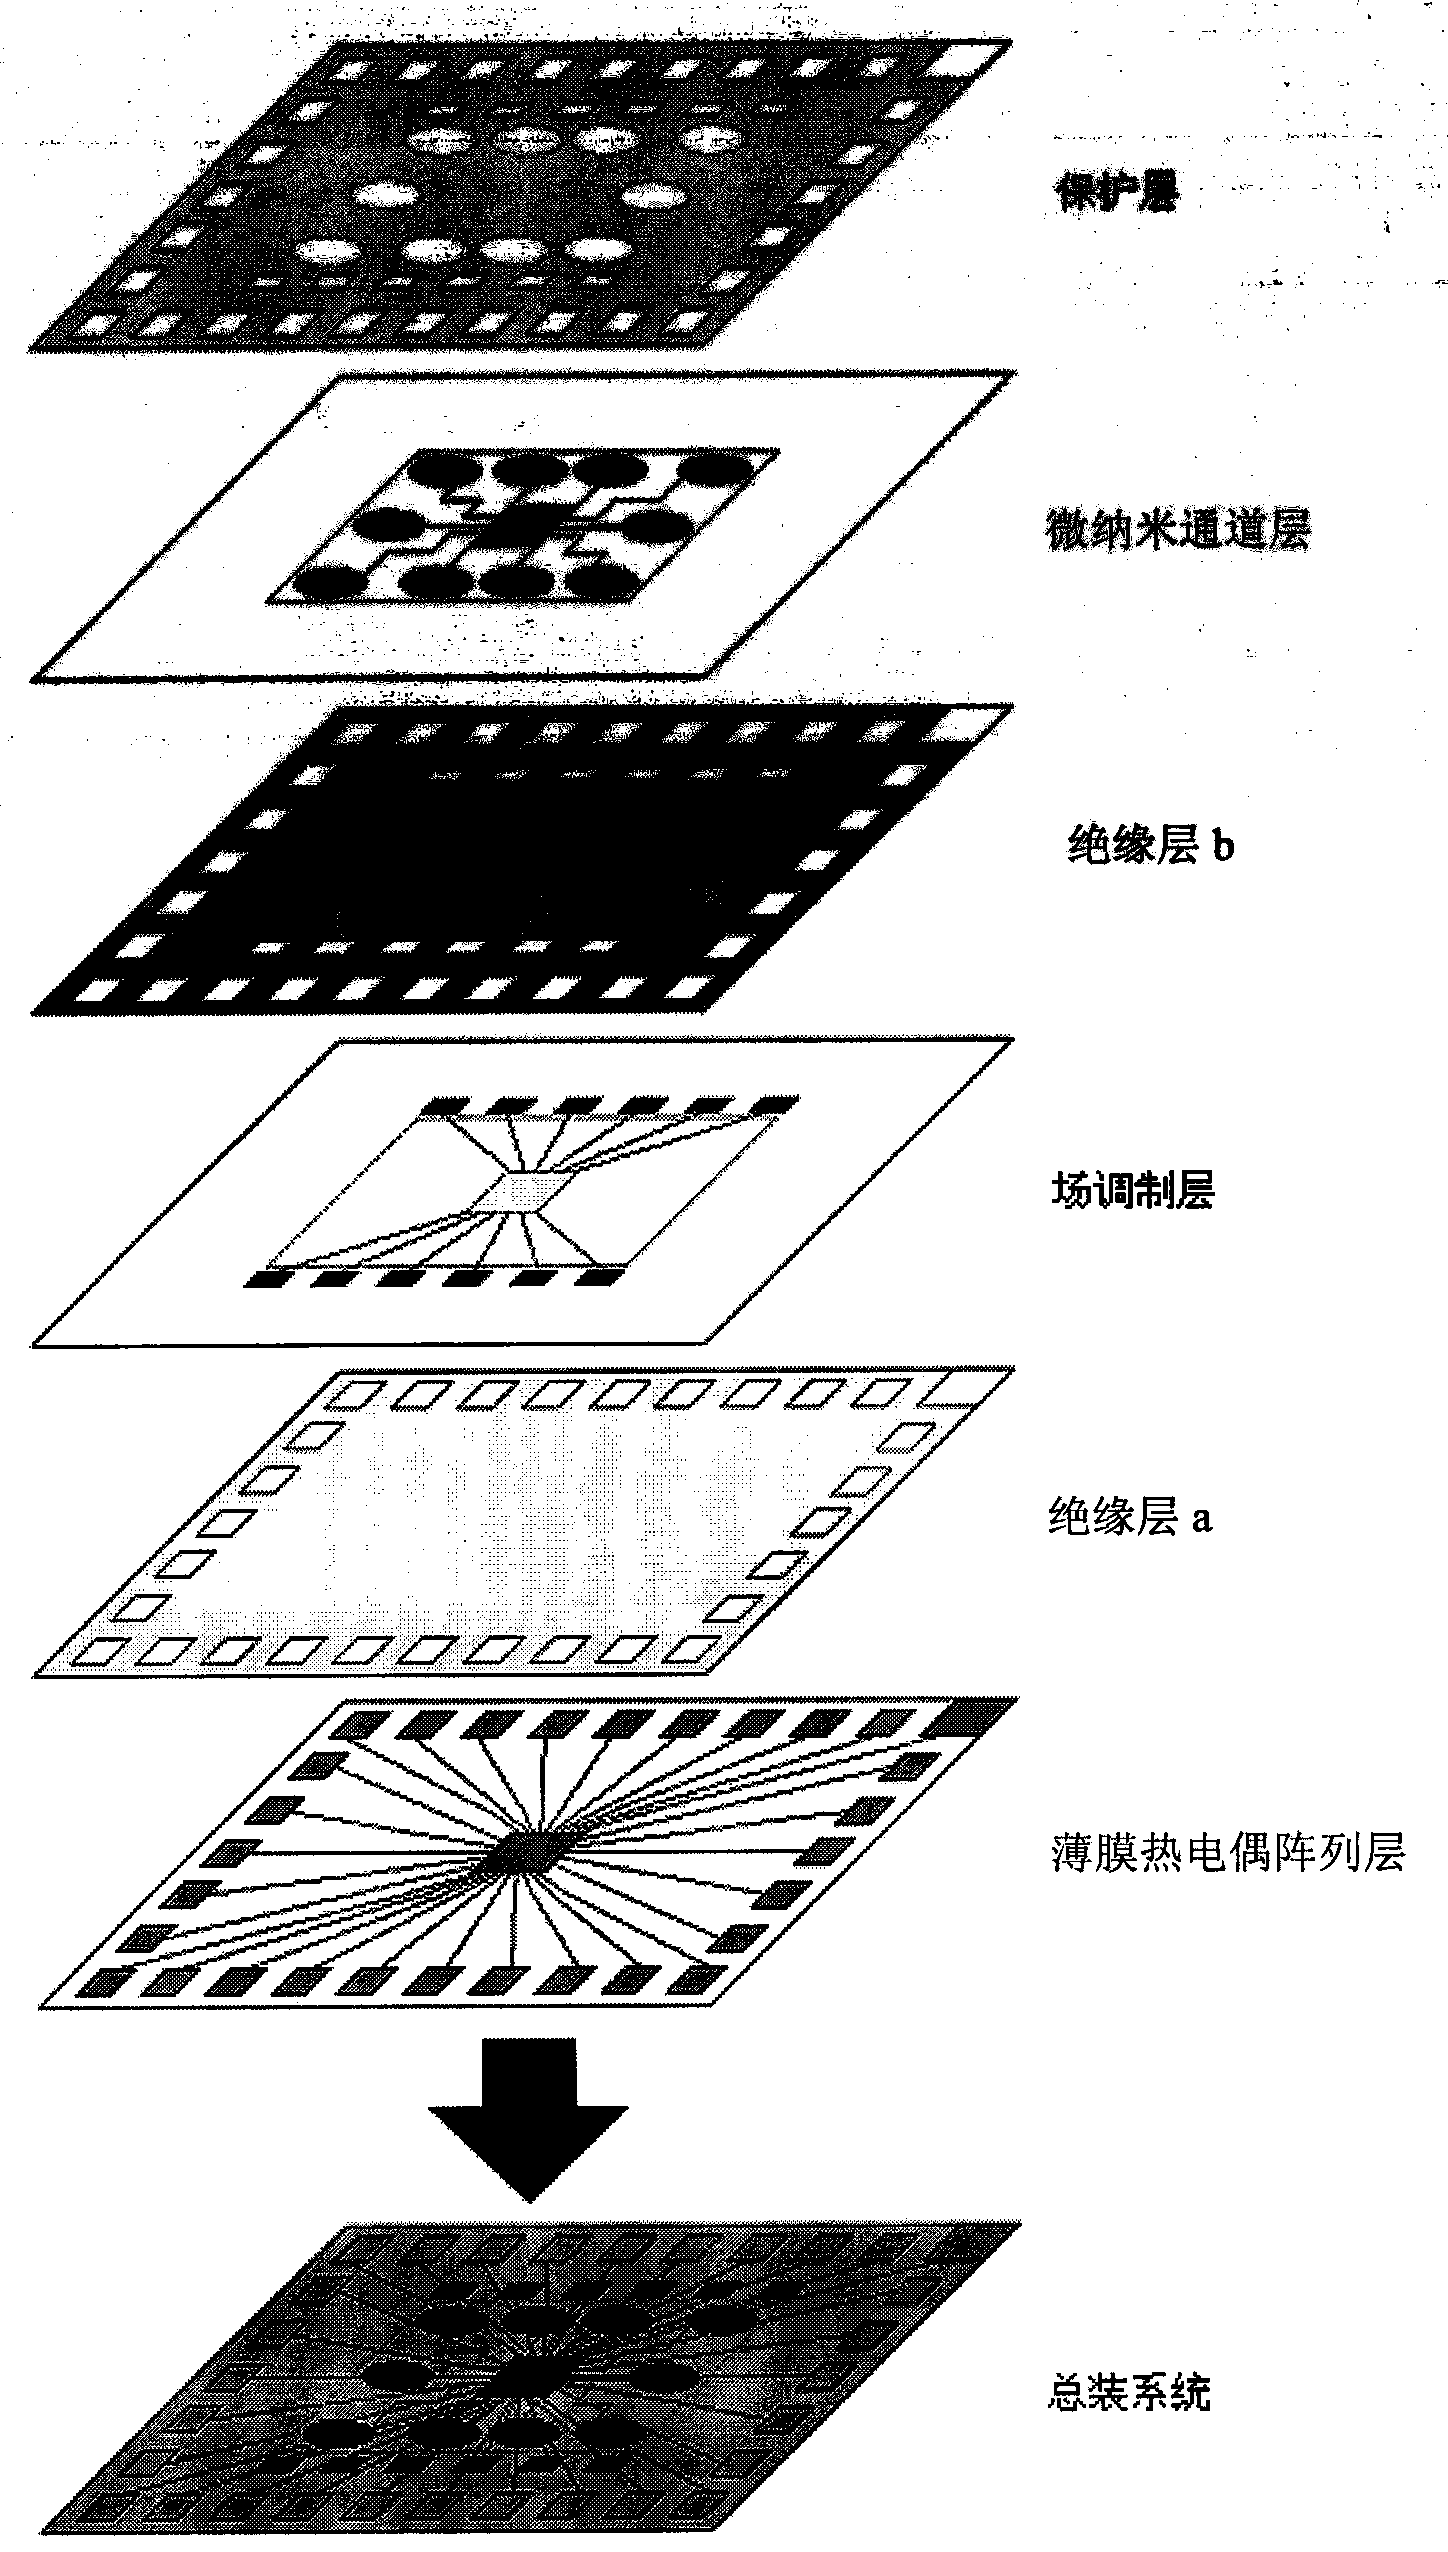 Micro-nano fluid system and preparation method thereof